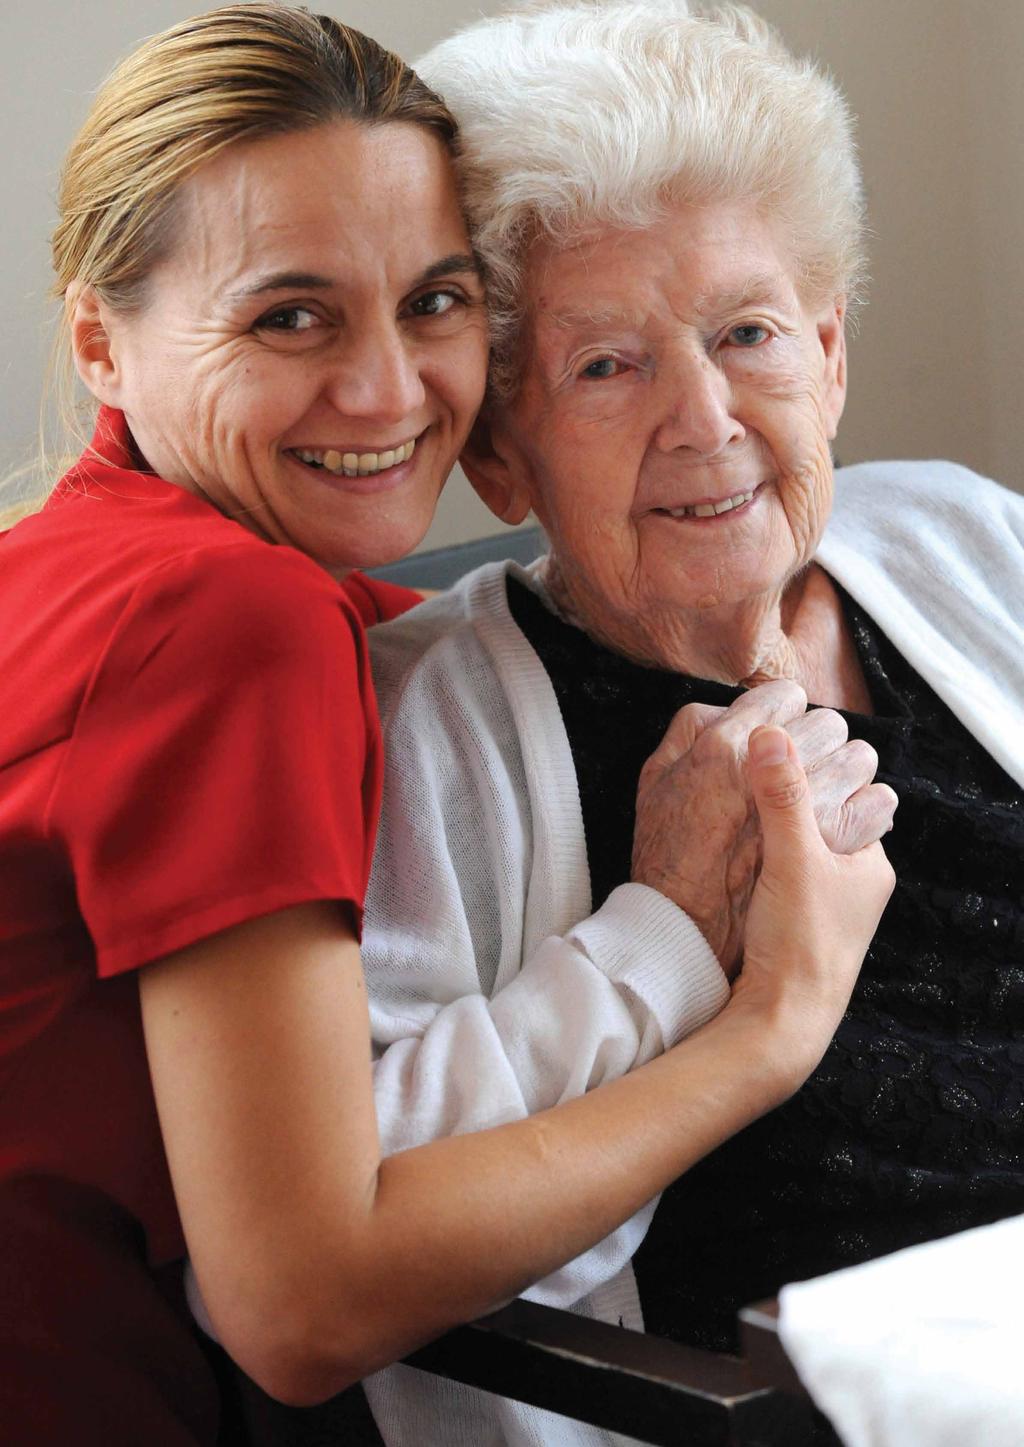 happiness of our service users. Our care homes constantly exceed expectations and our home care services continue to deliver standards that are far beyond our rivals.